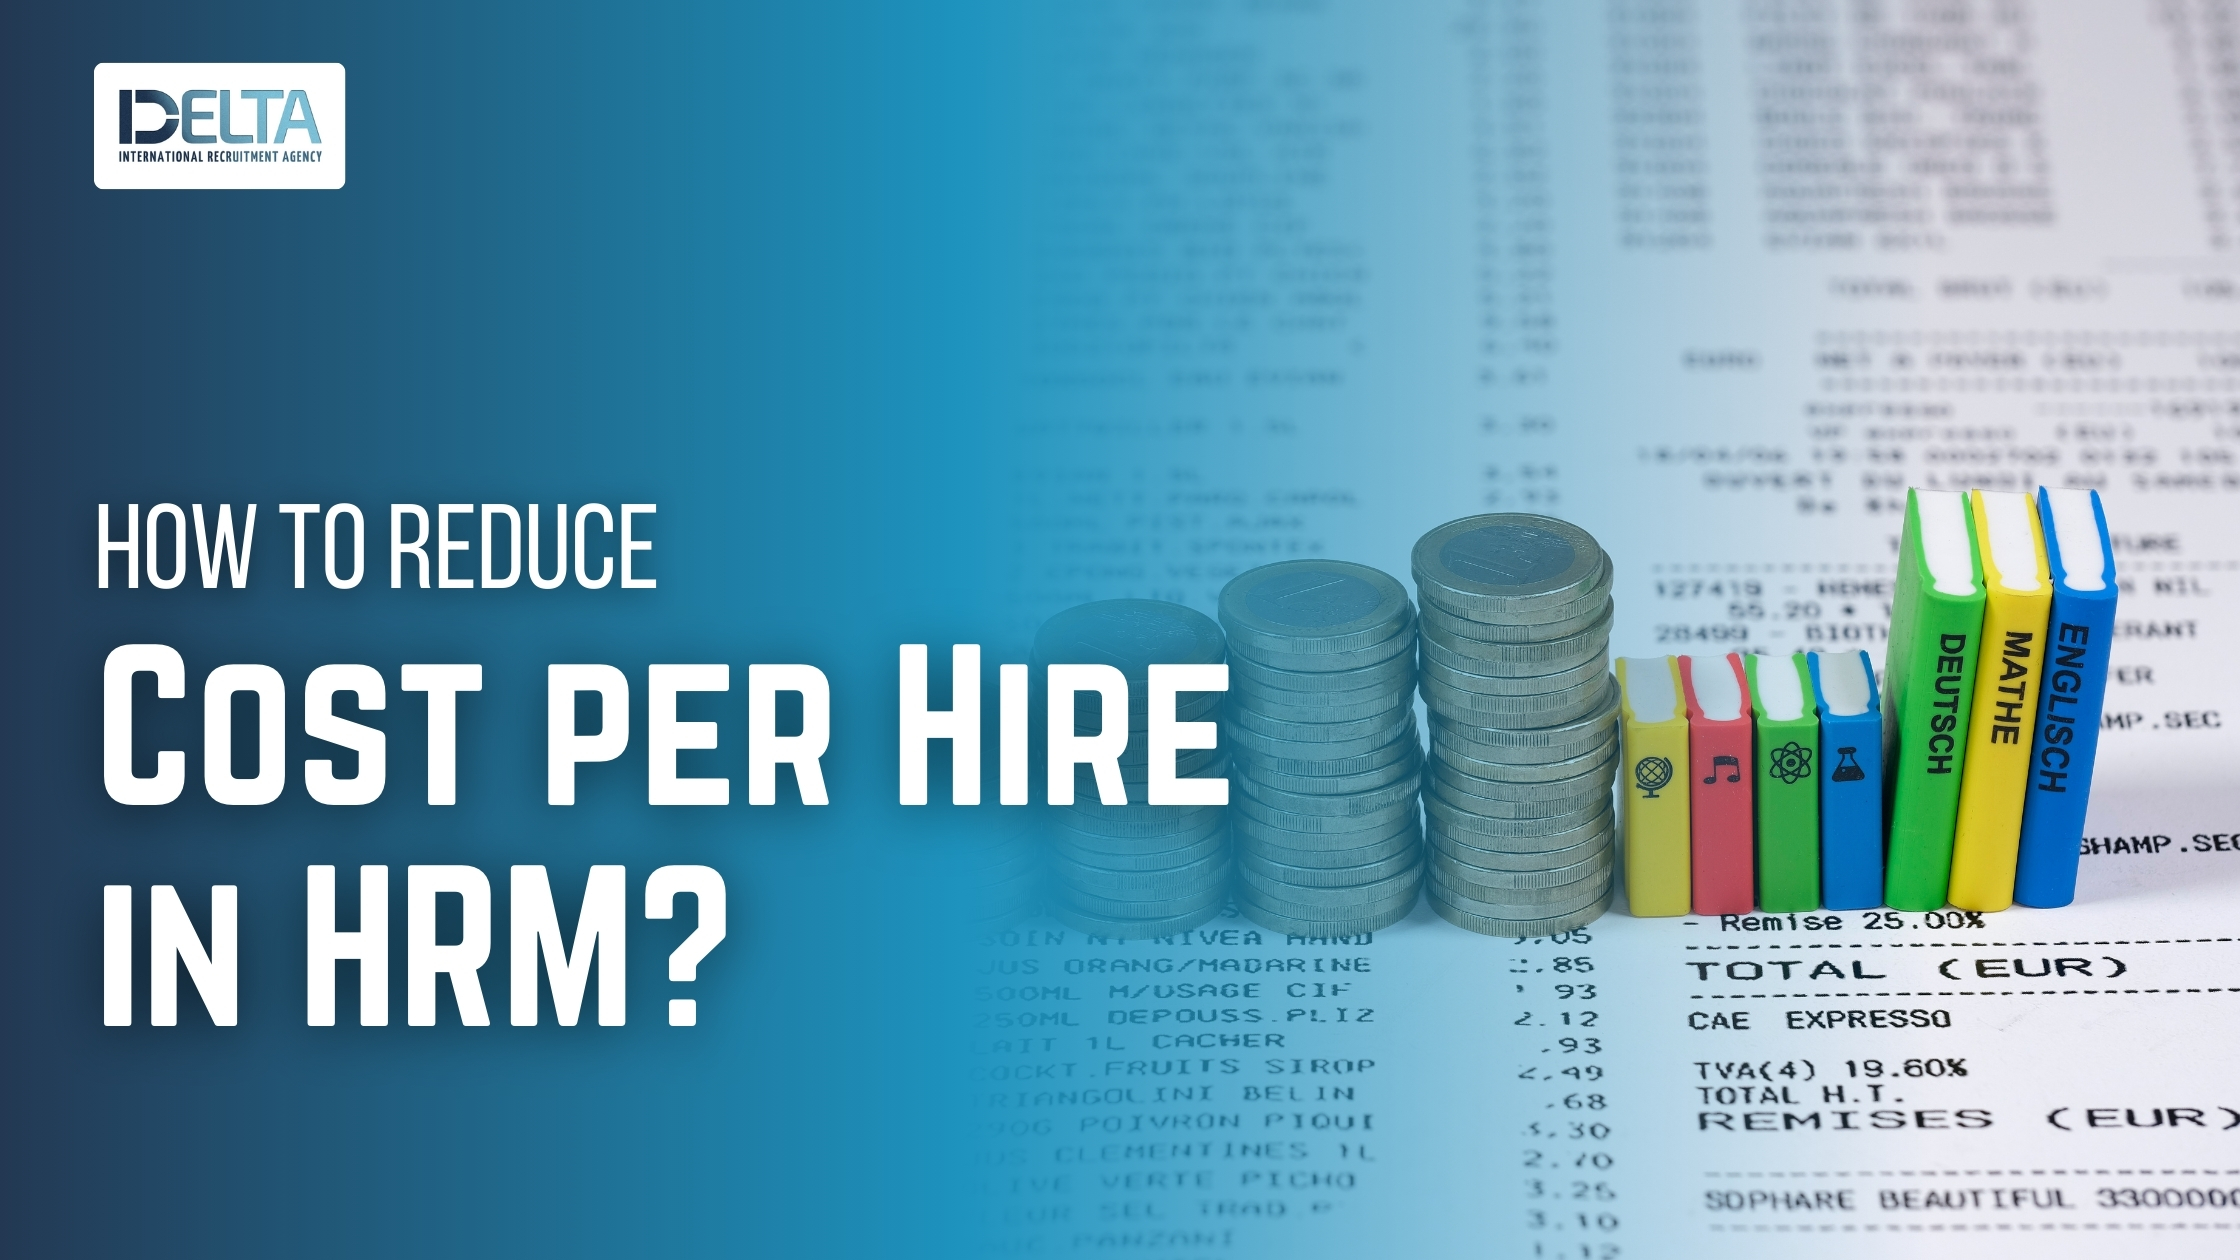 How to Reduce Cost per Hire in HRM?